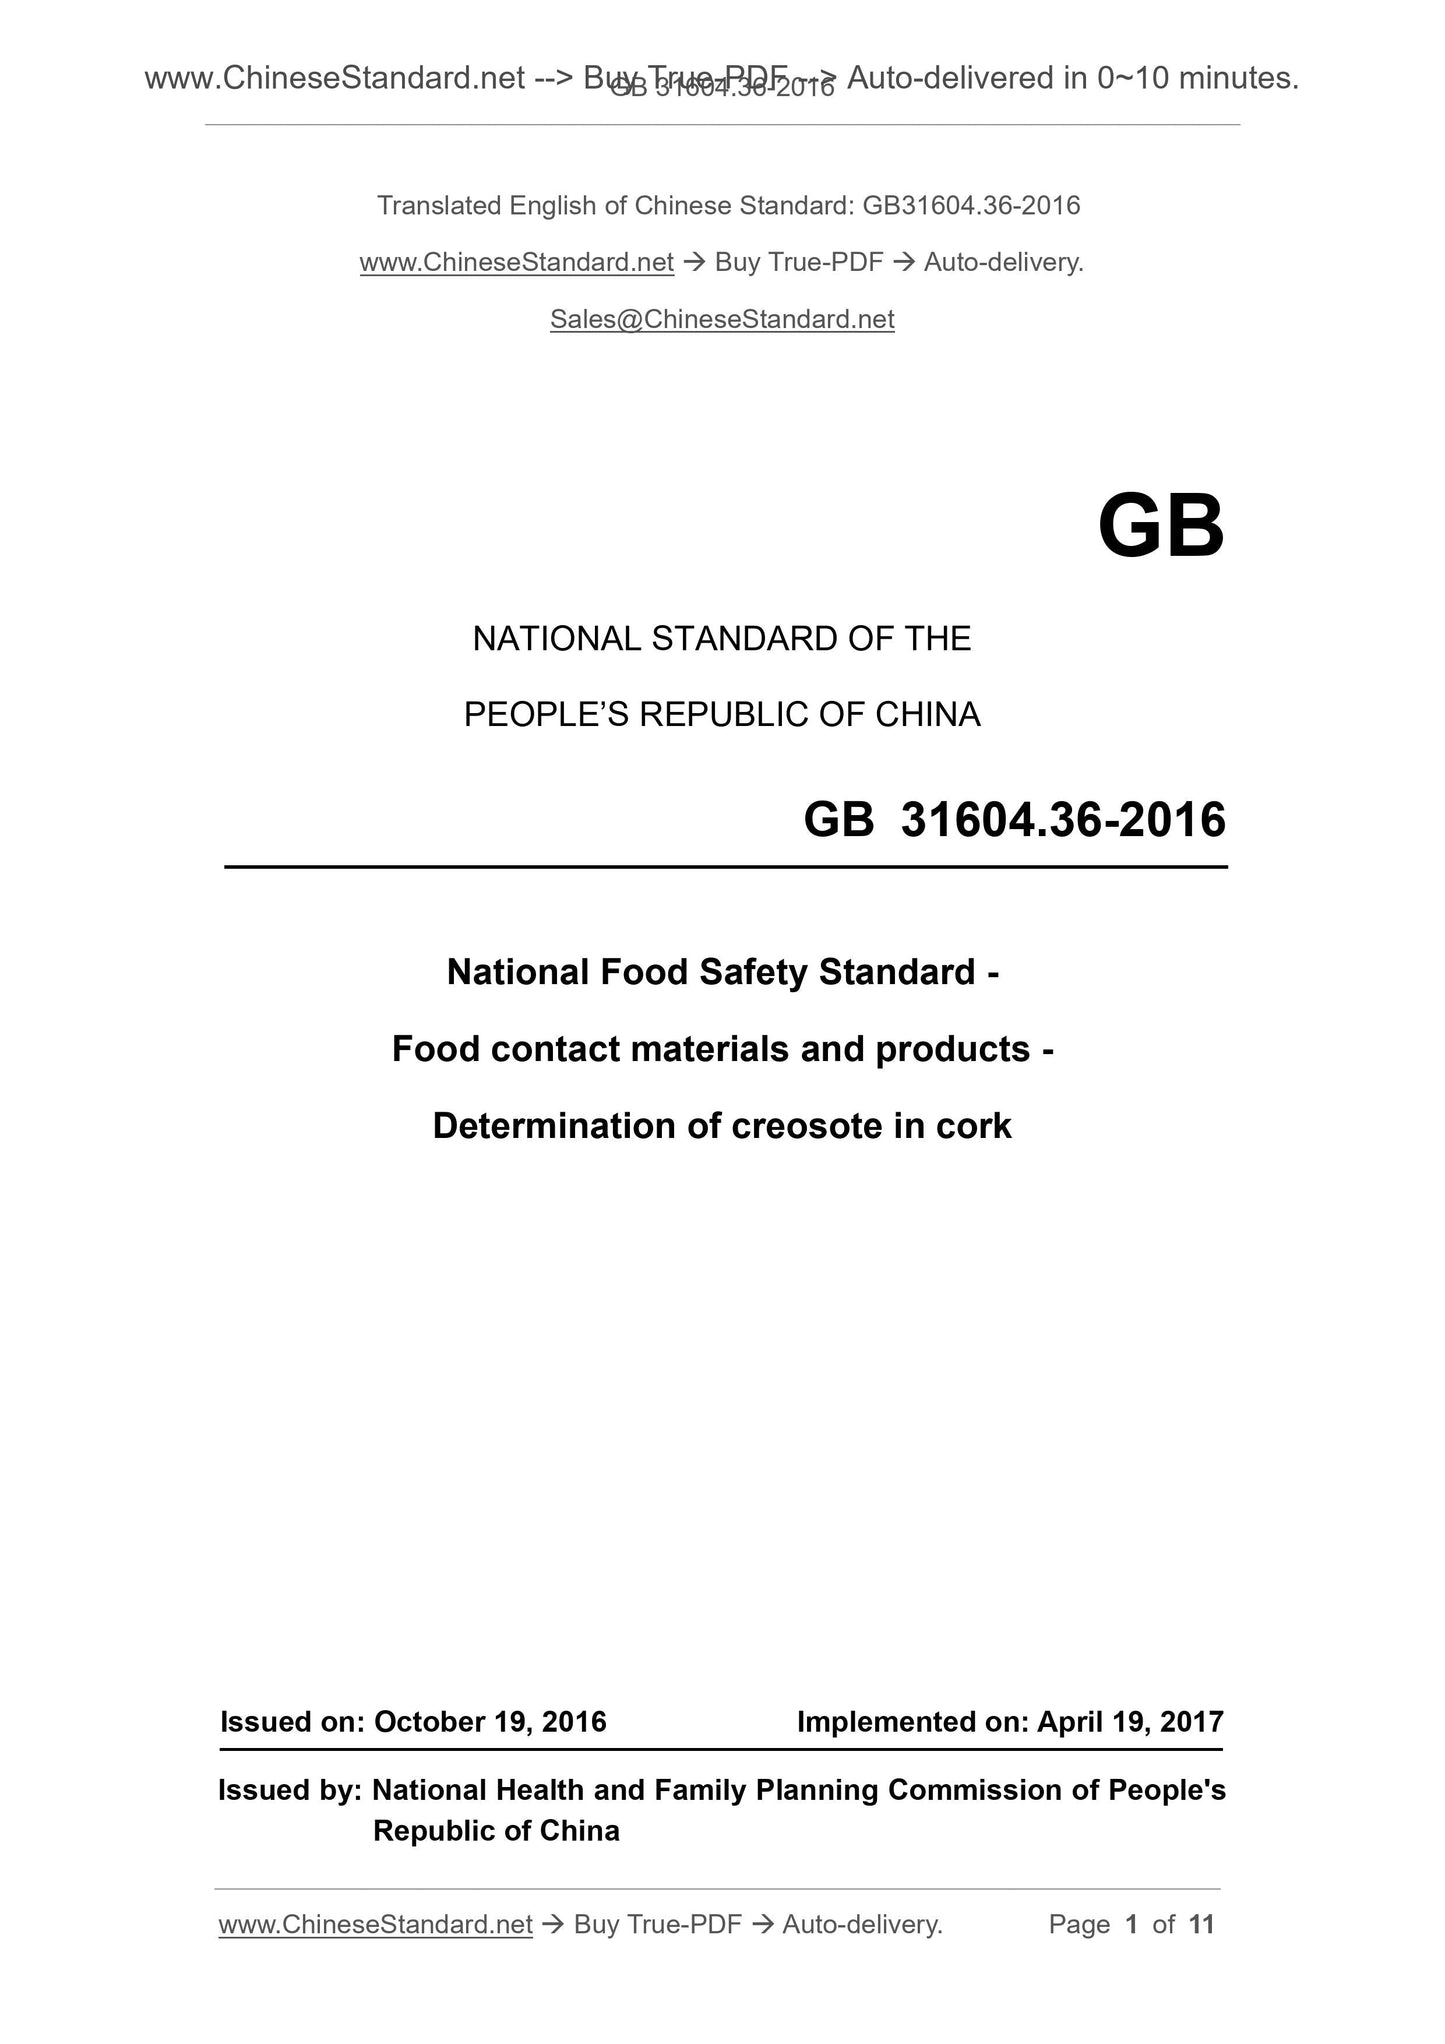 GB 31604.36-2016 Page 1